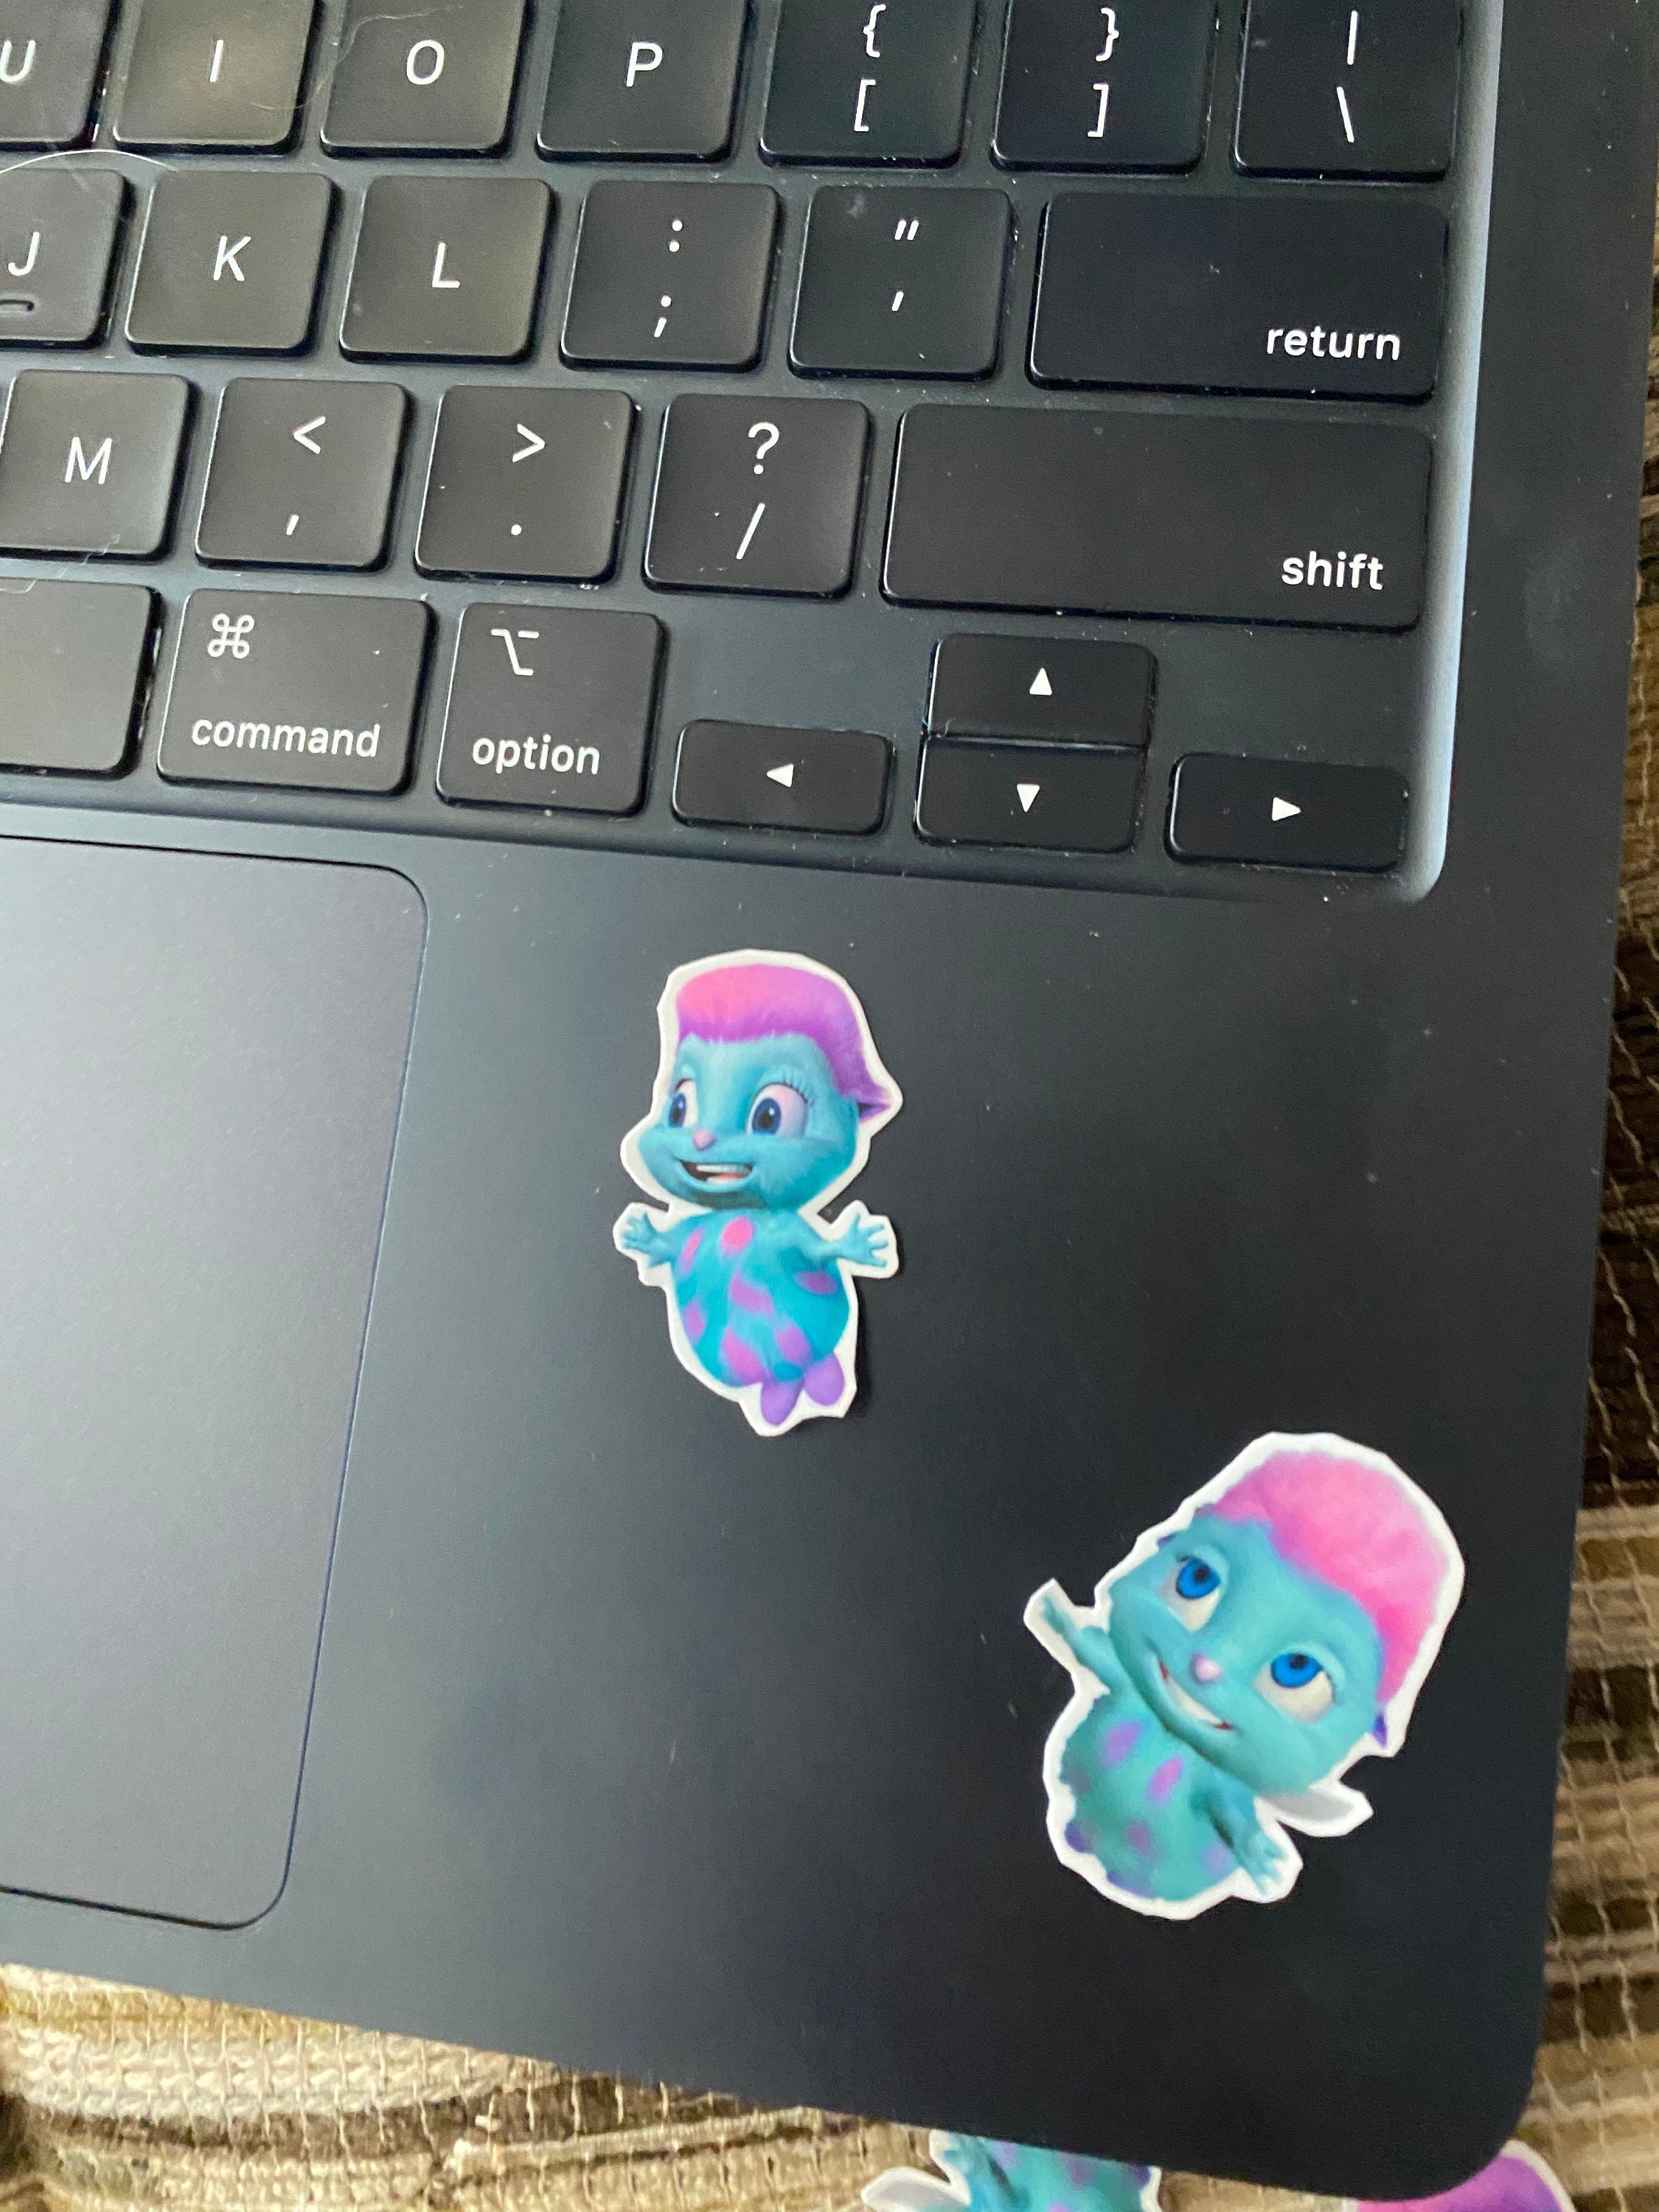 bibble stickers are now available on my website! Link in my